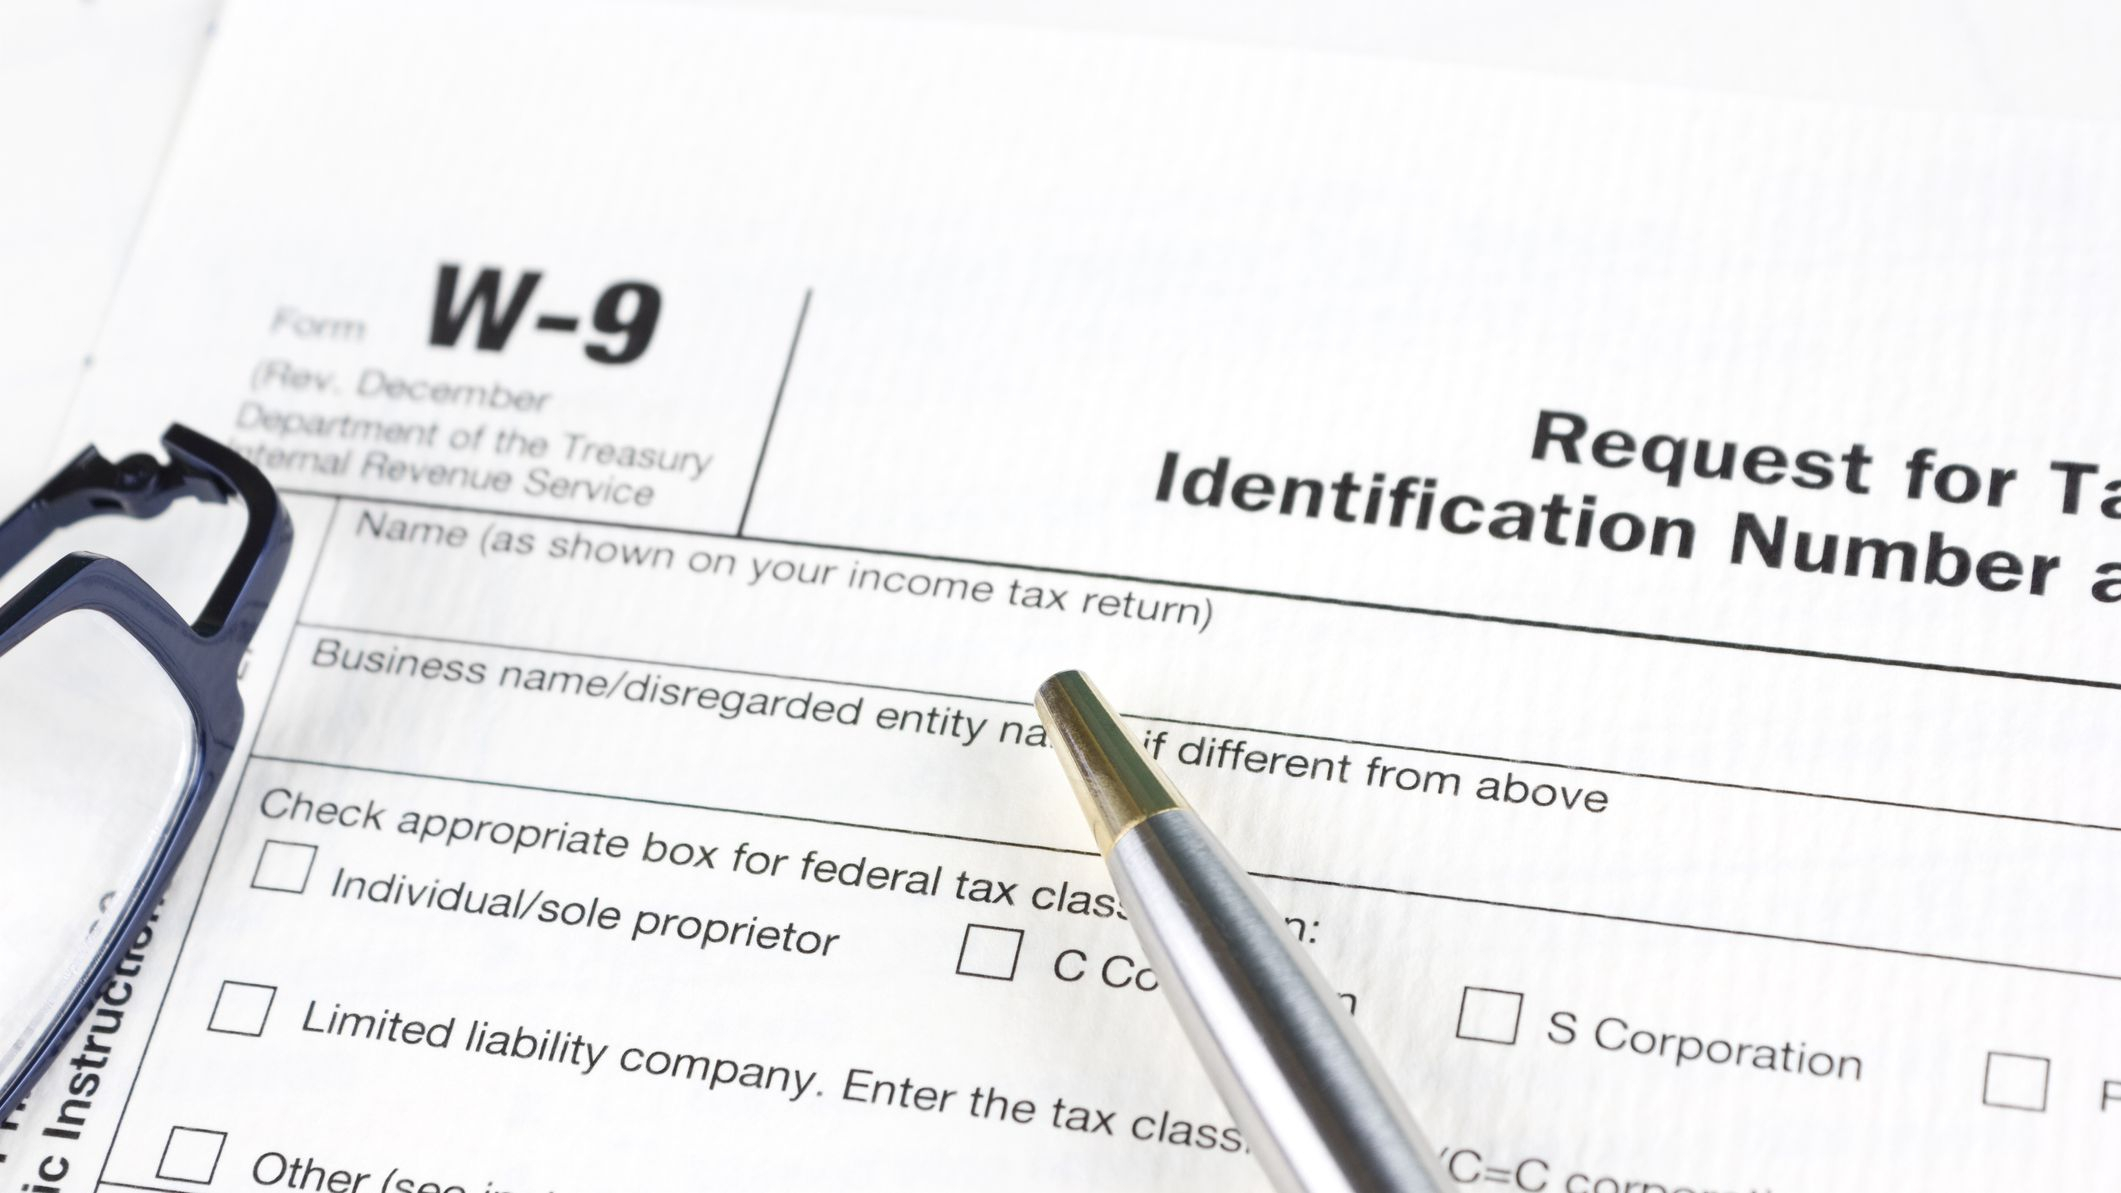 Irs Form W-9: What Is It?